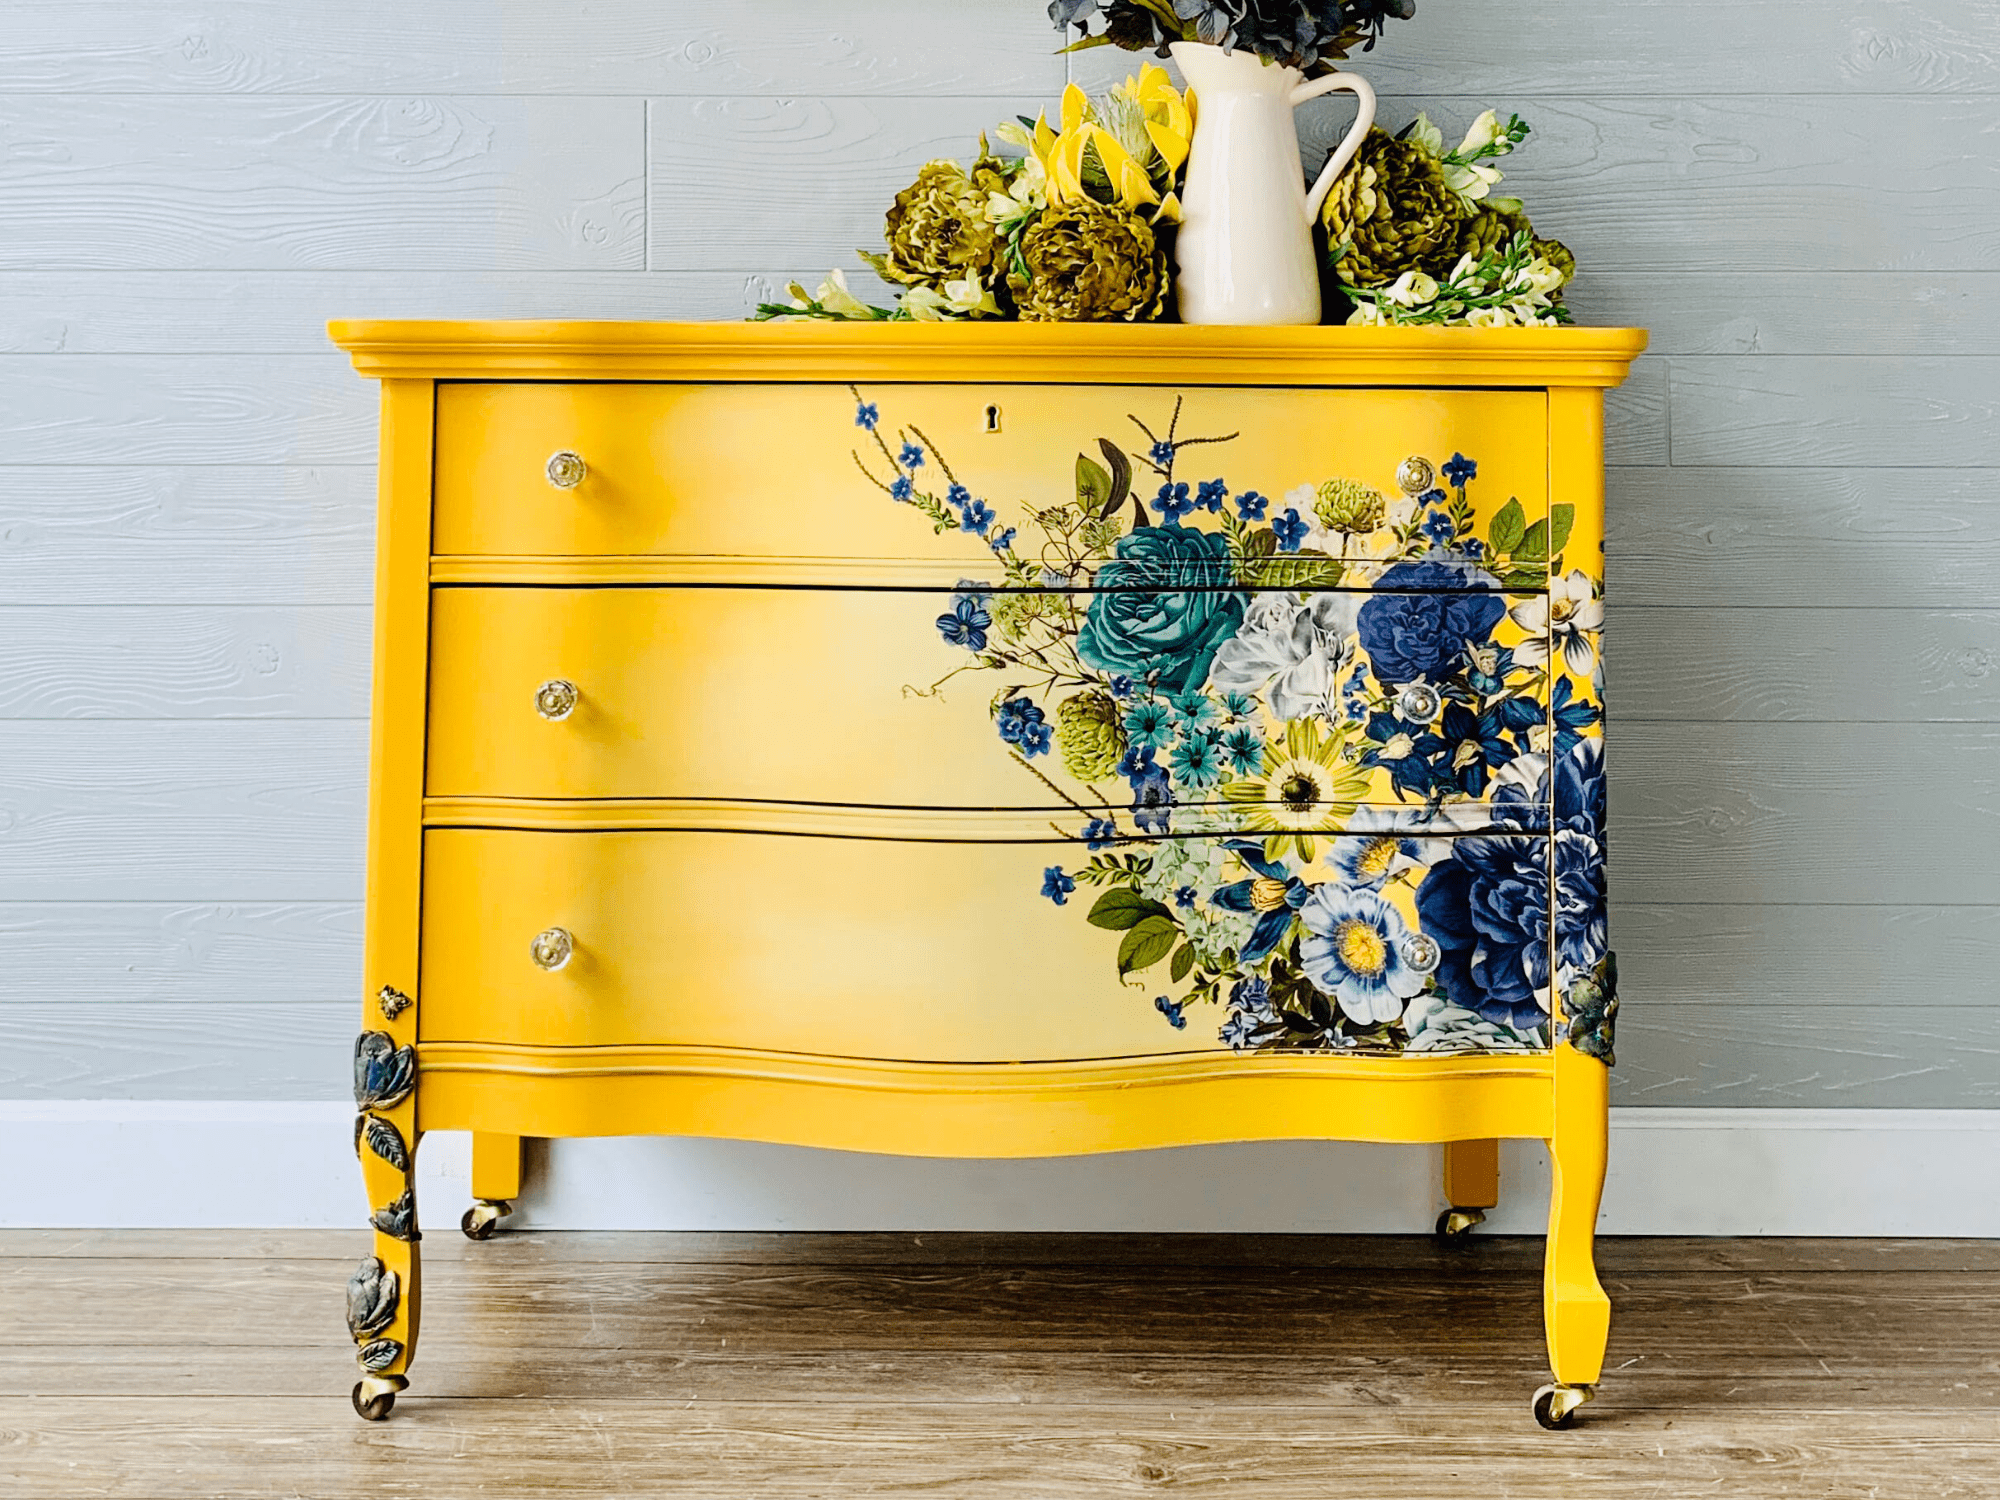 Painted Furniture in Yellow Chalk Mineral Paint Tutorial